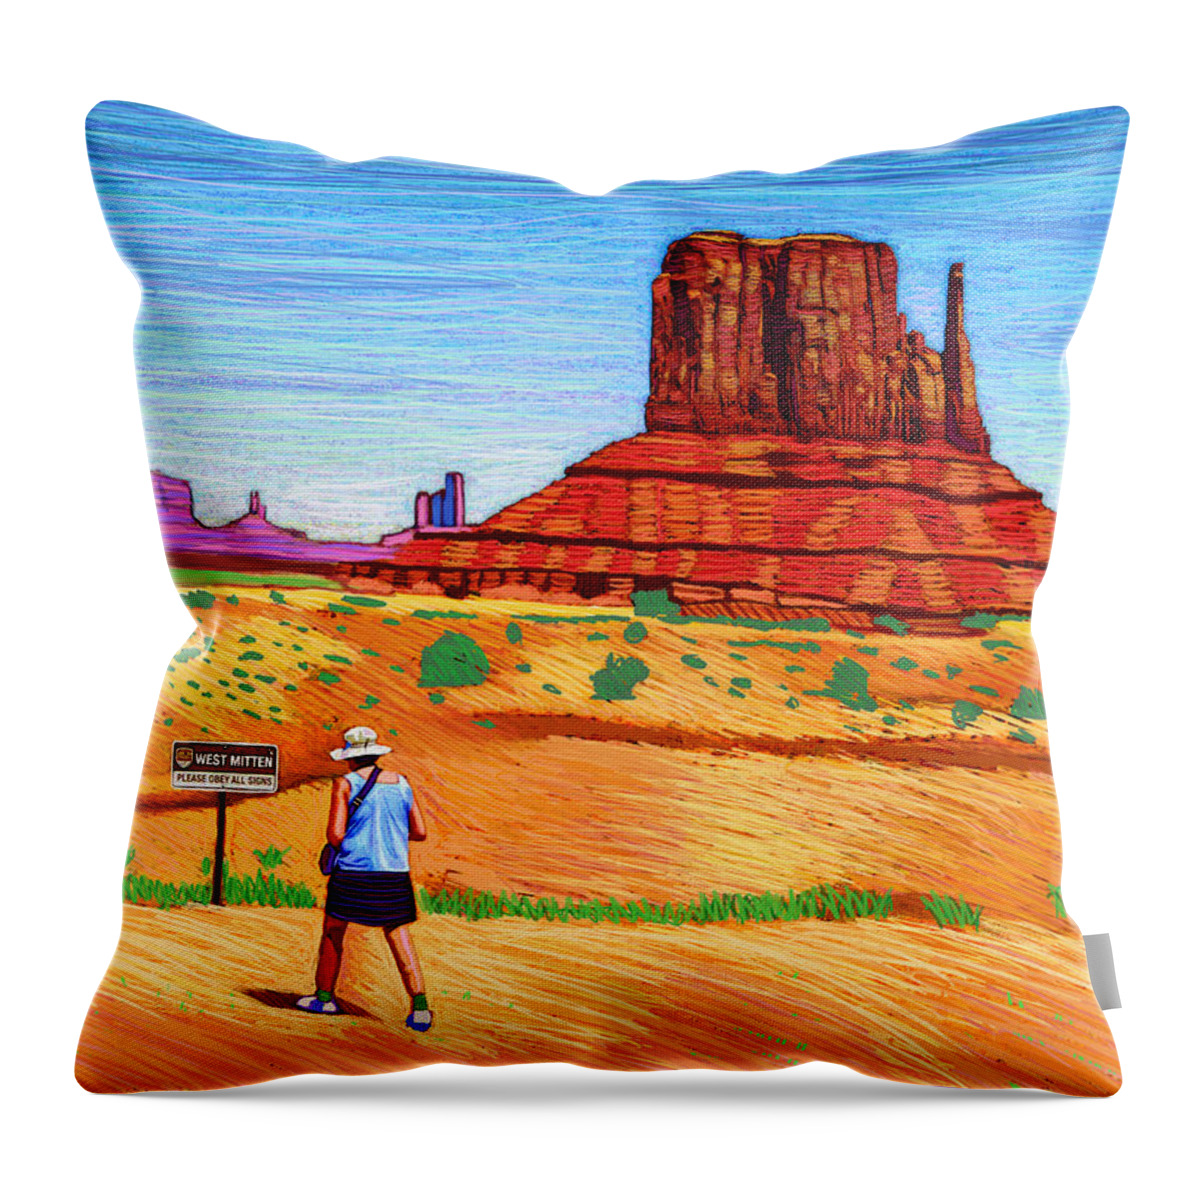 Monument Valley Throw Pillow featuring the digital art West Mitten by Rod Whyte